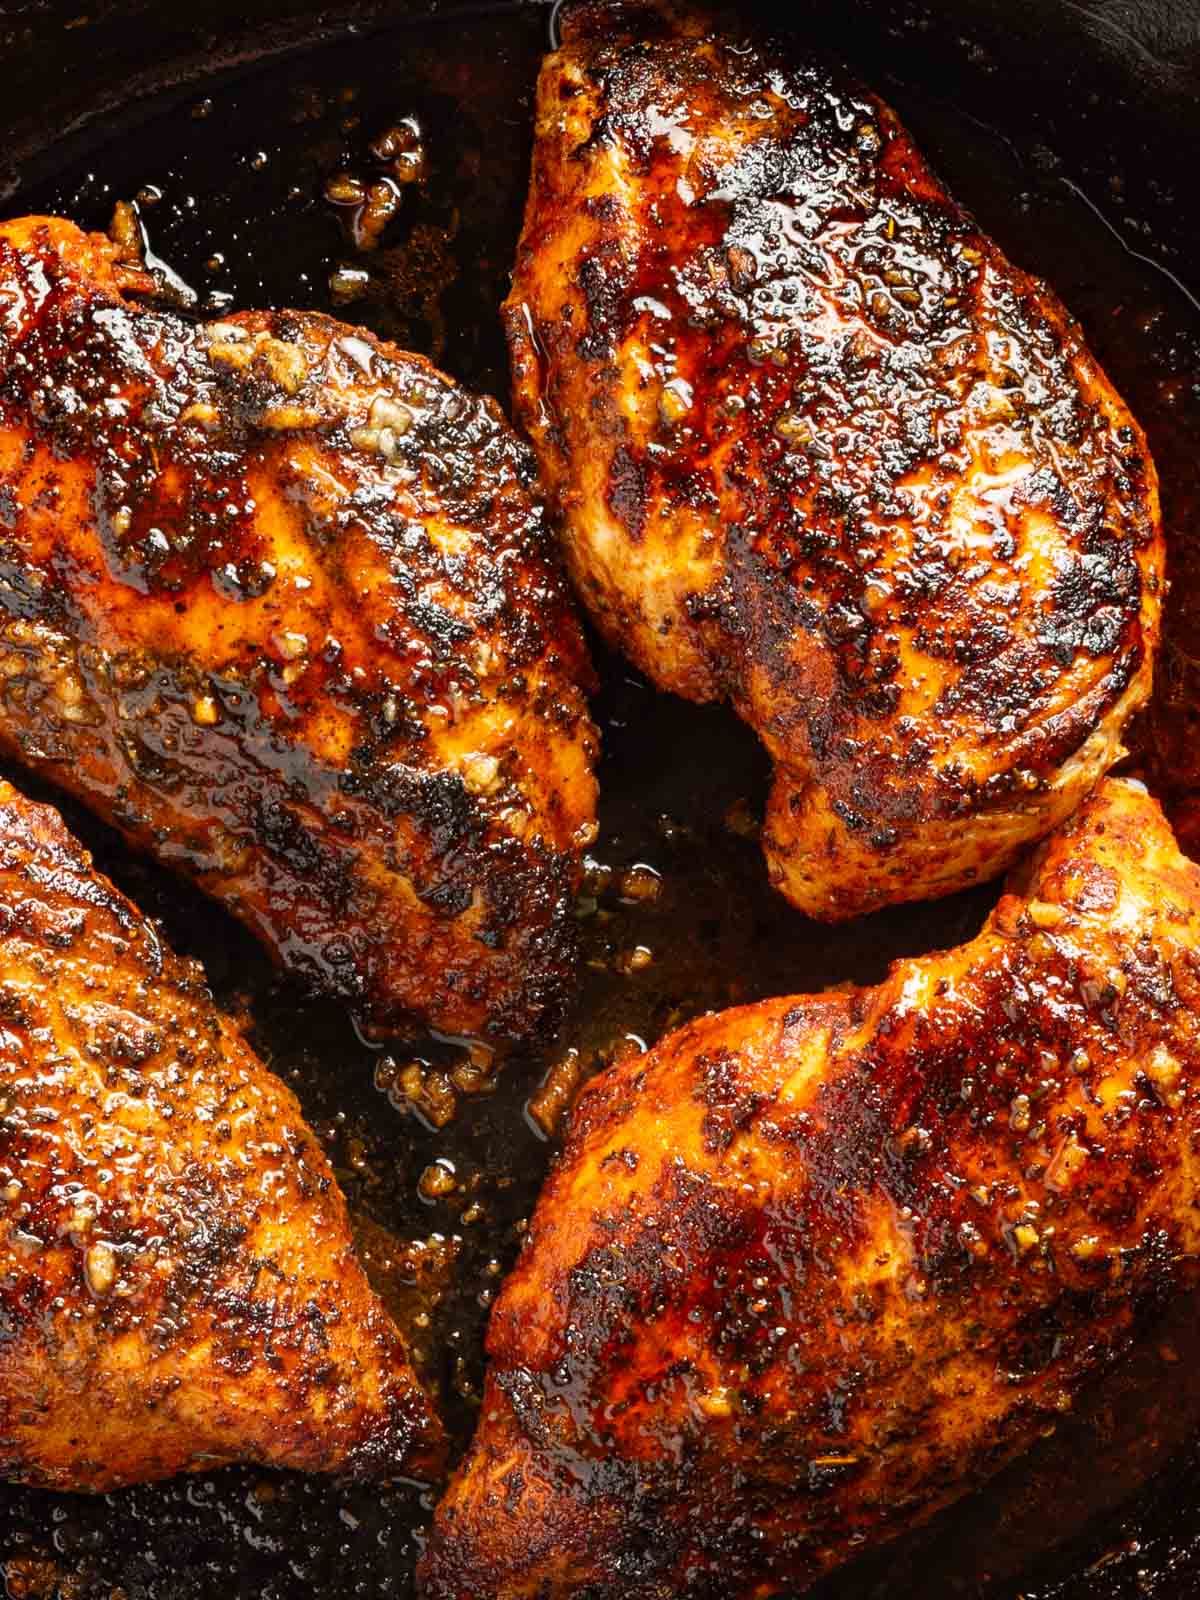 Up close blackened chicken breasts topped with garlic butter.